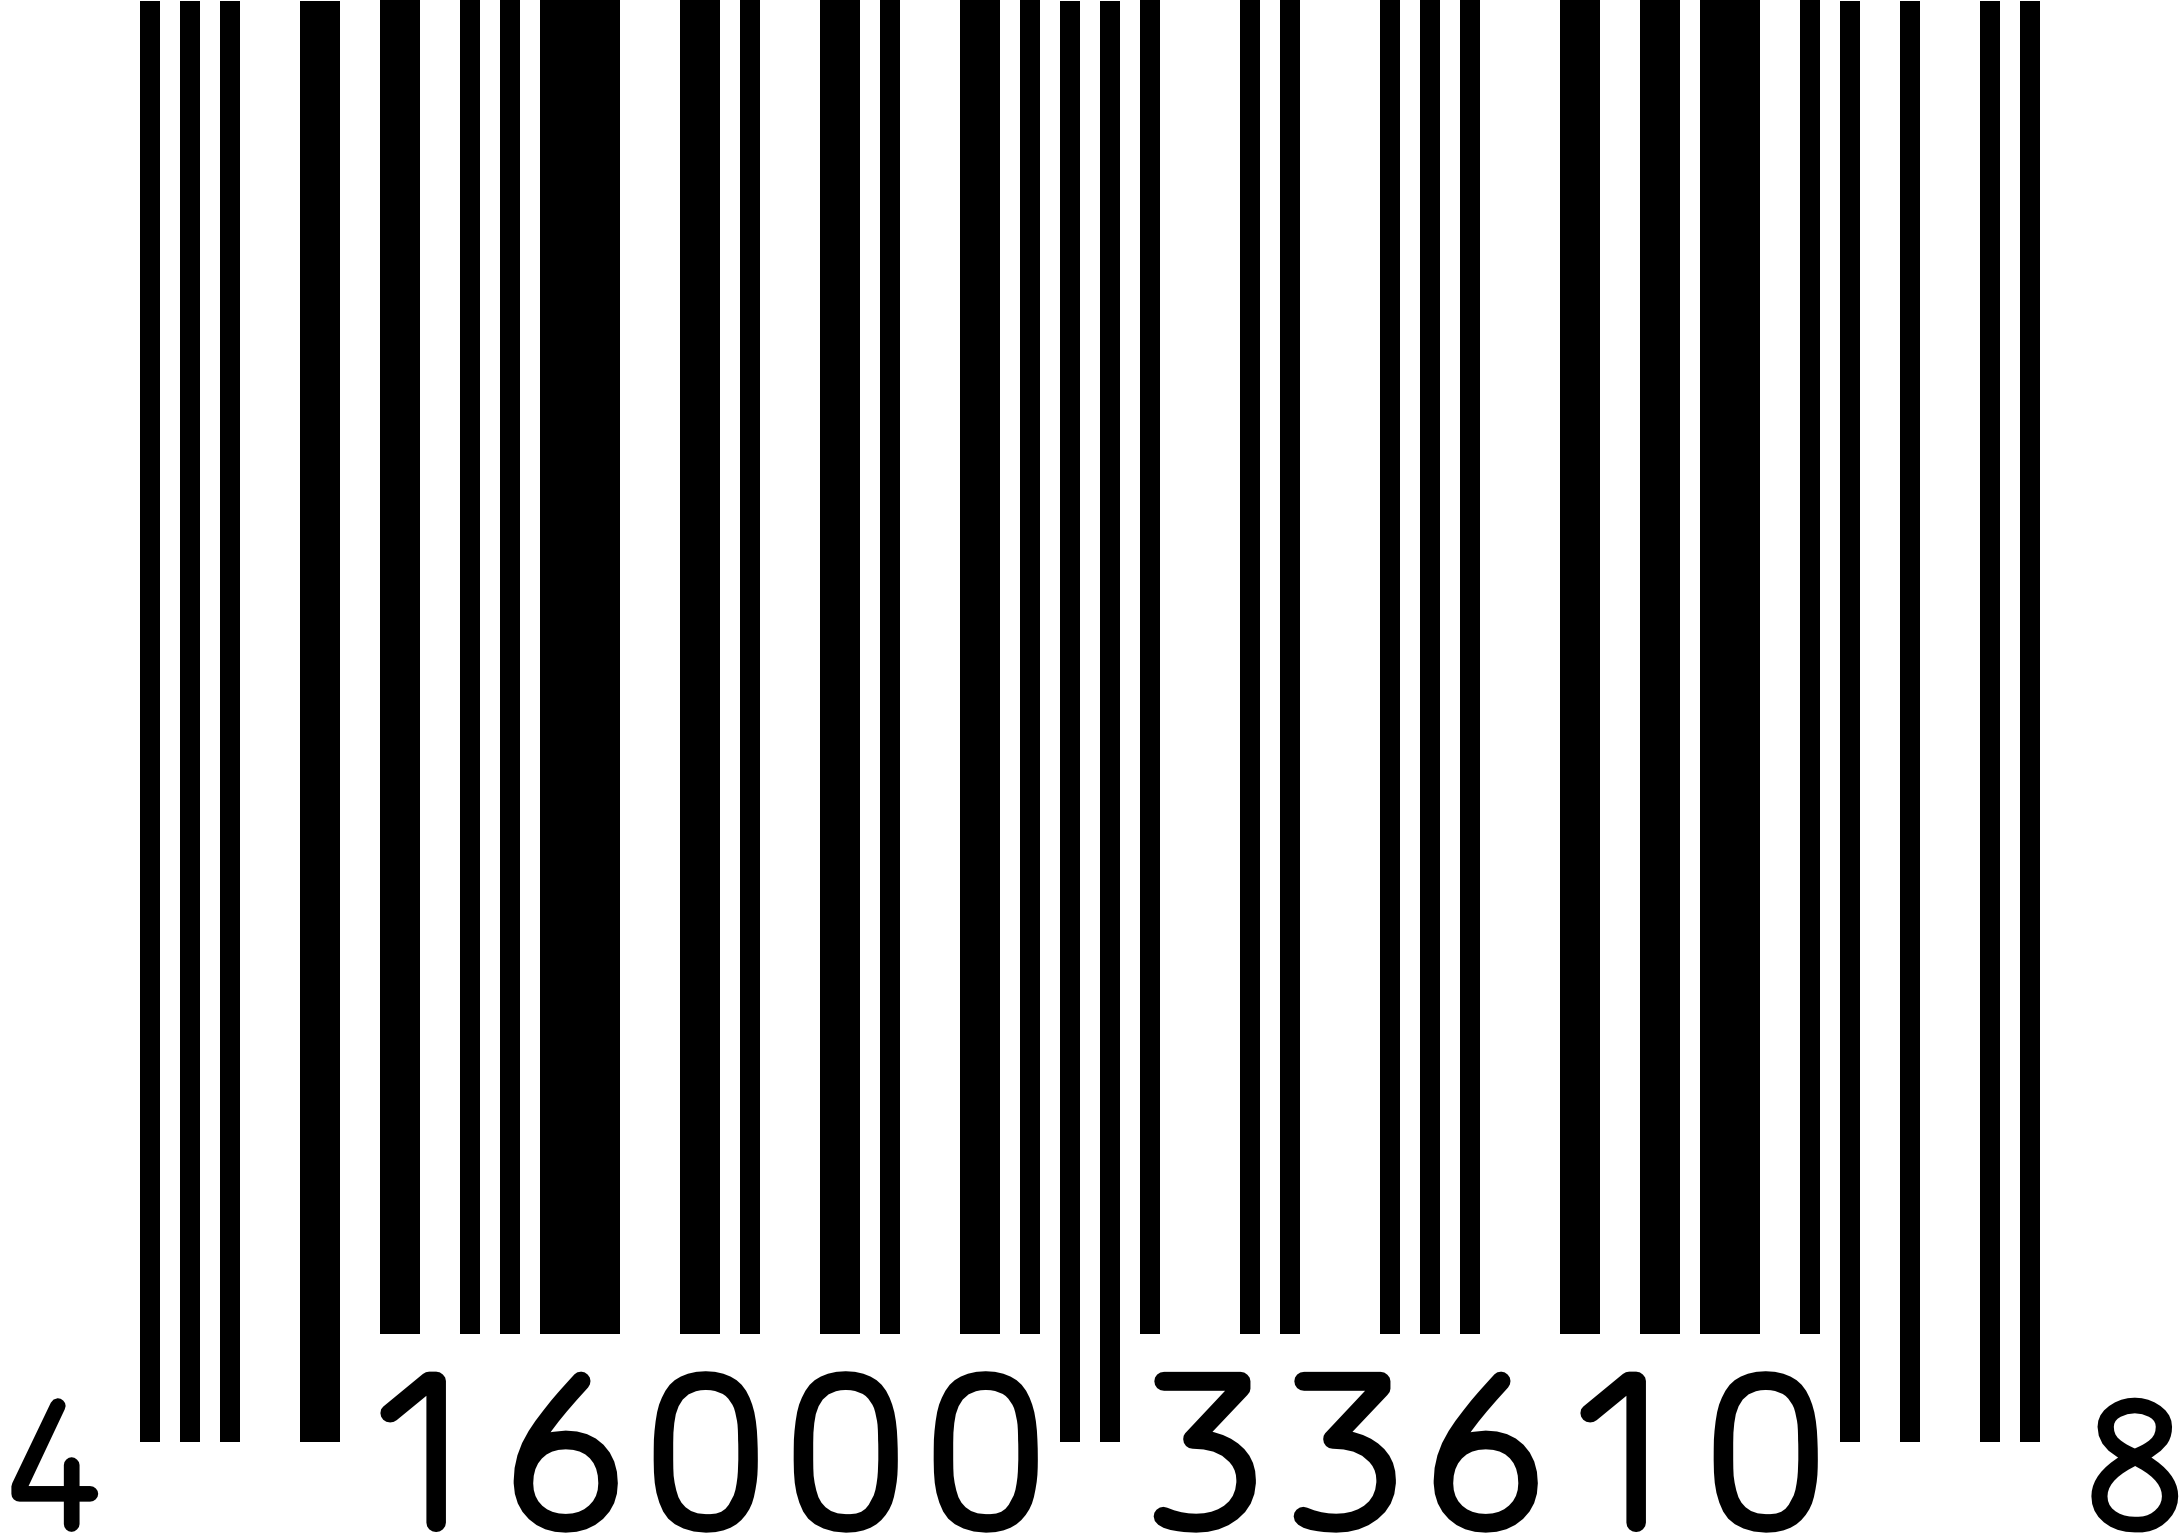 Example UPC-A Composite Barcode